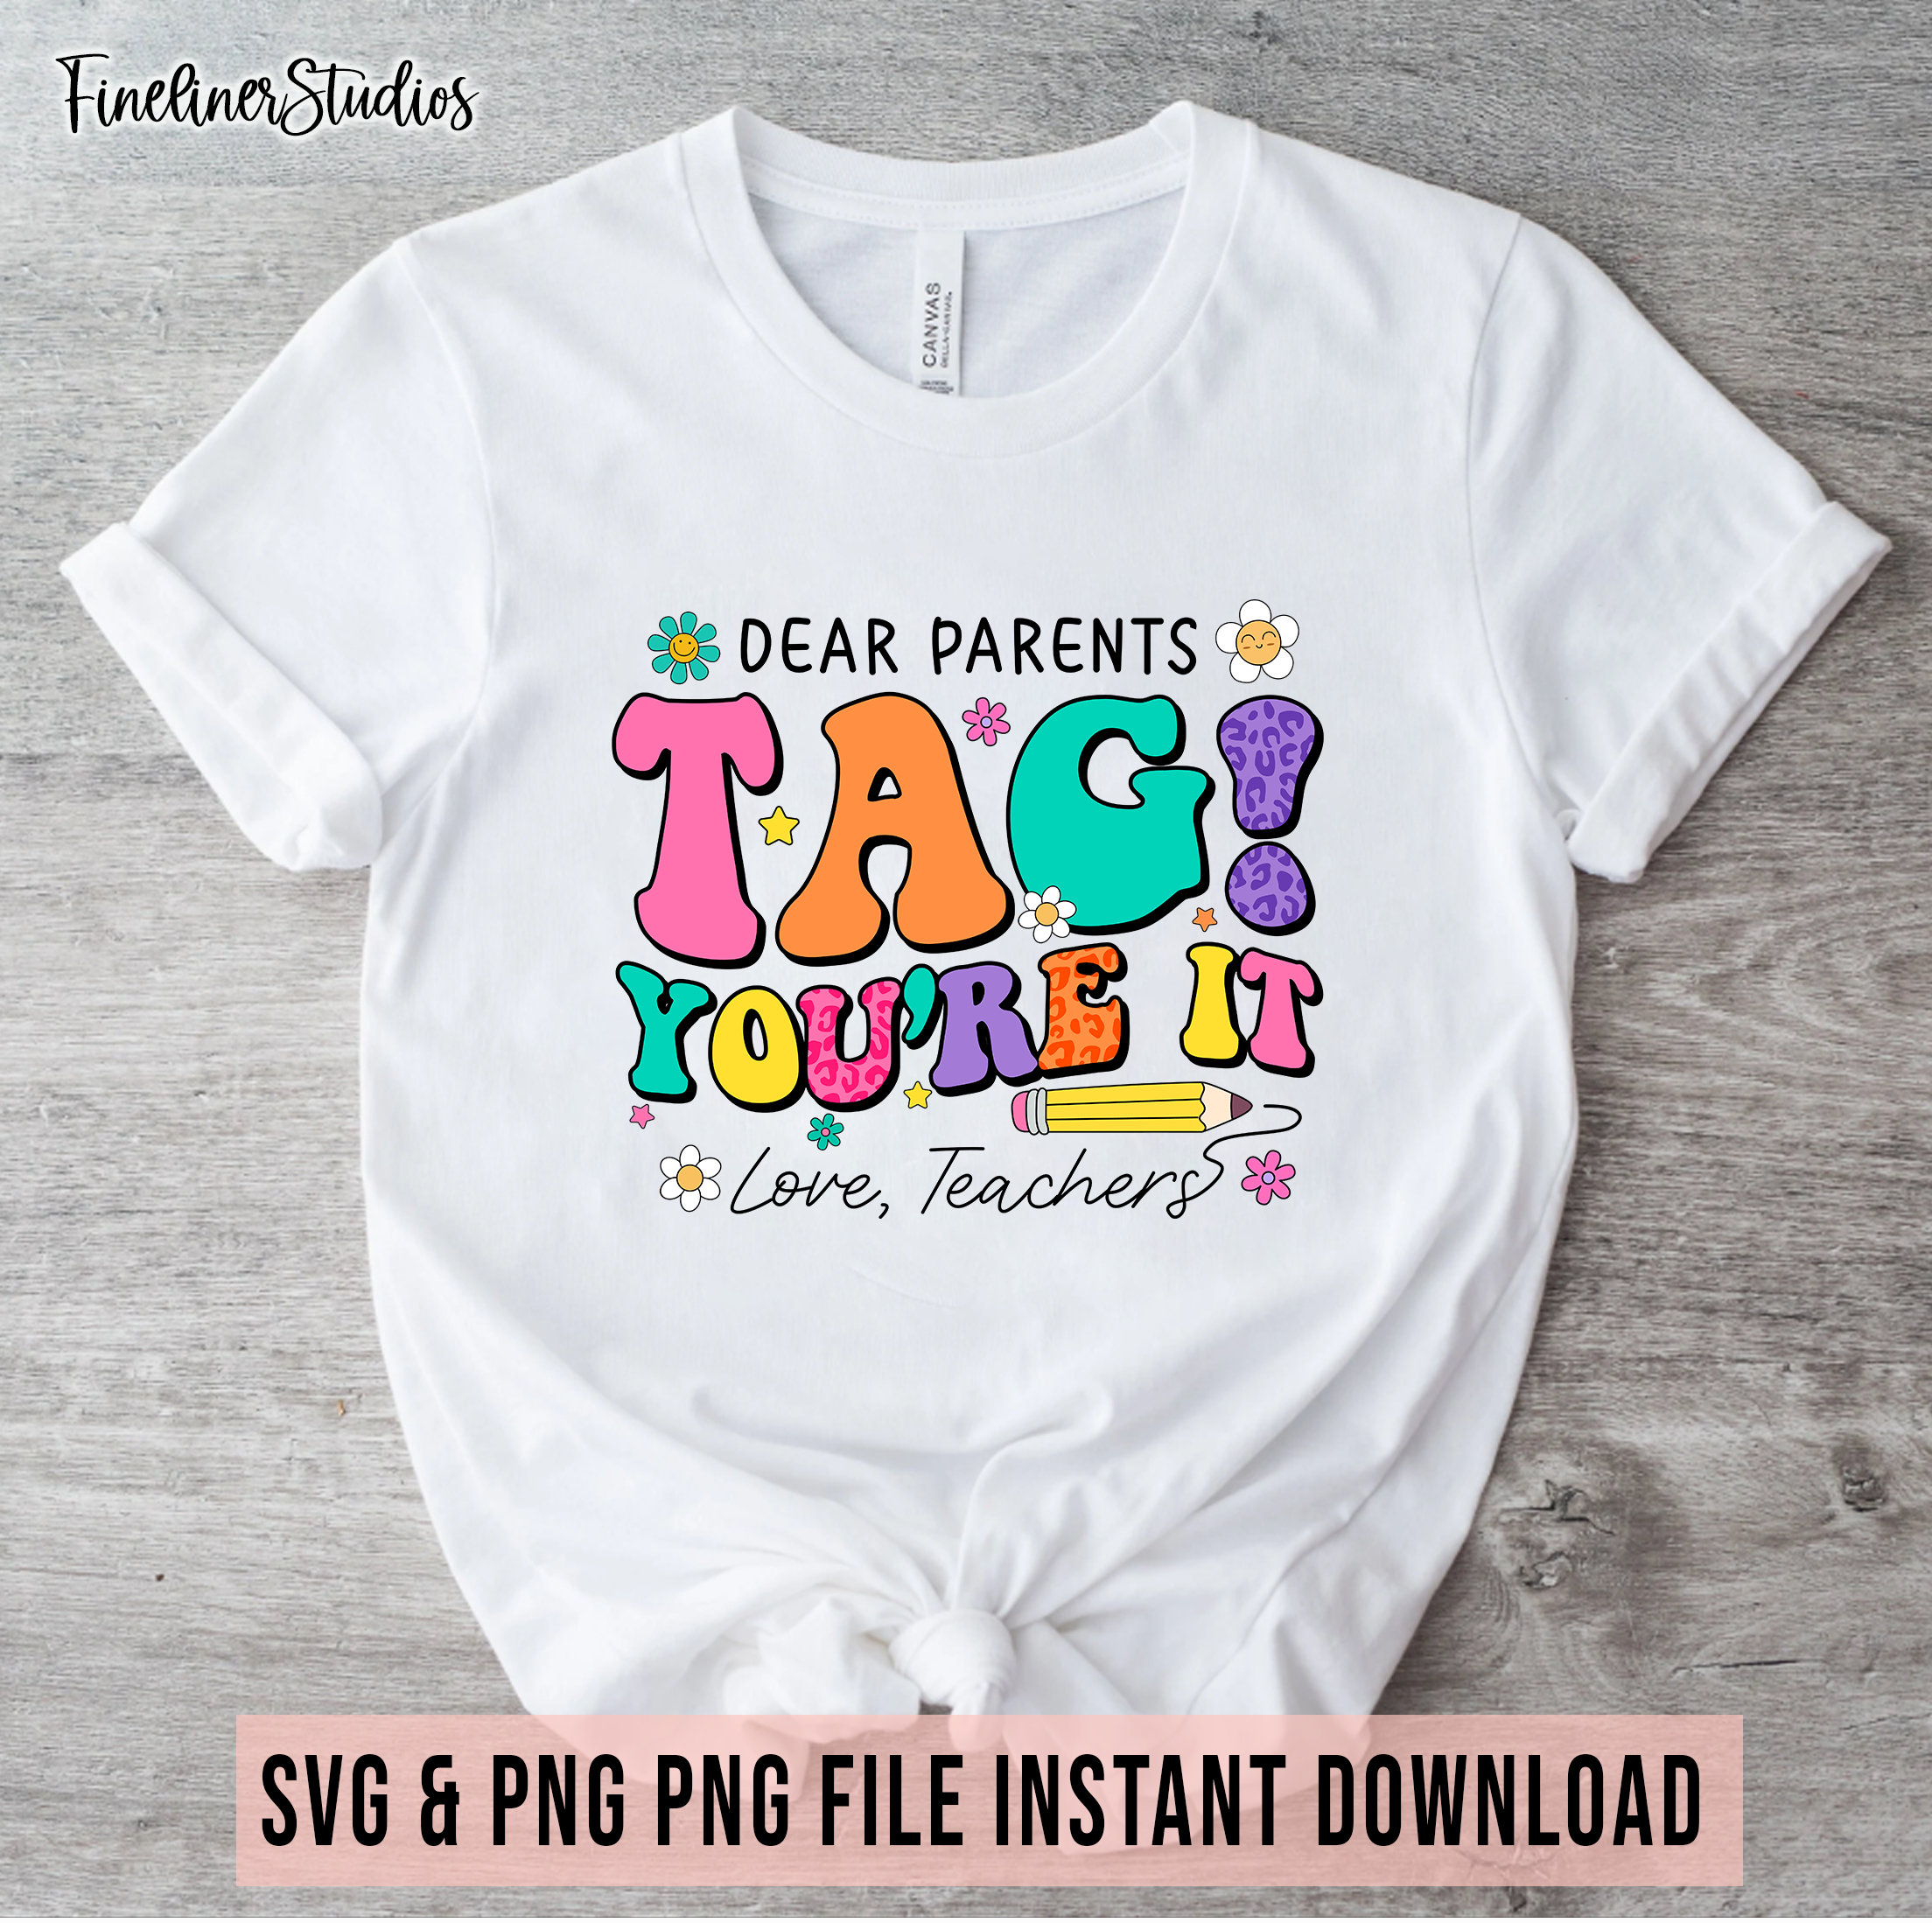 Buy Parent Quote Svg Online In India - Etsy India